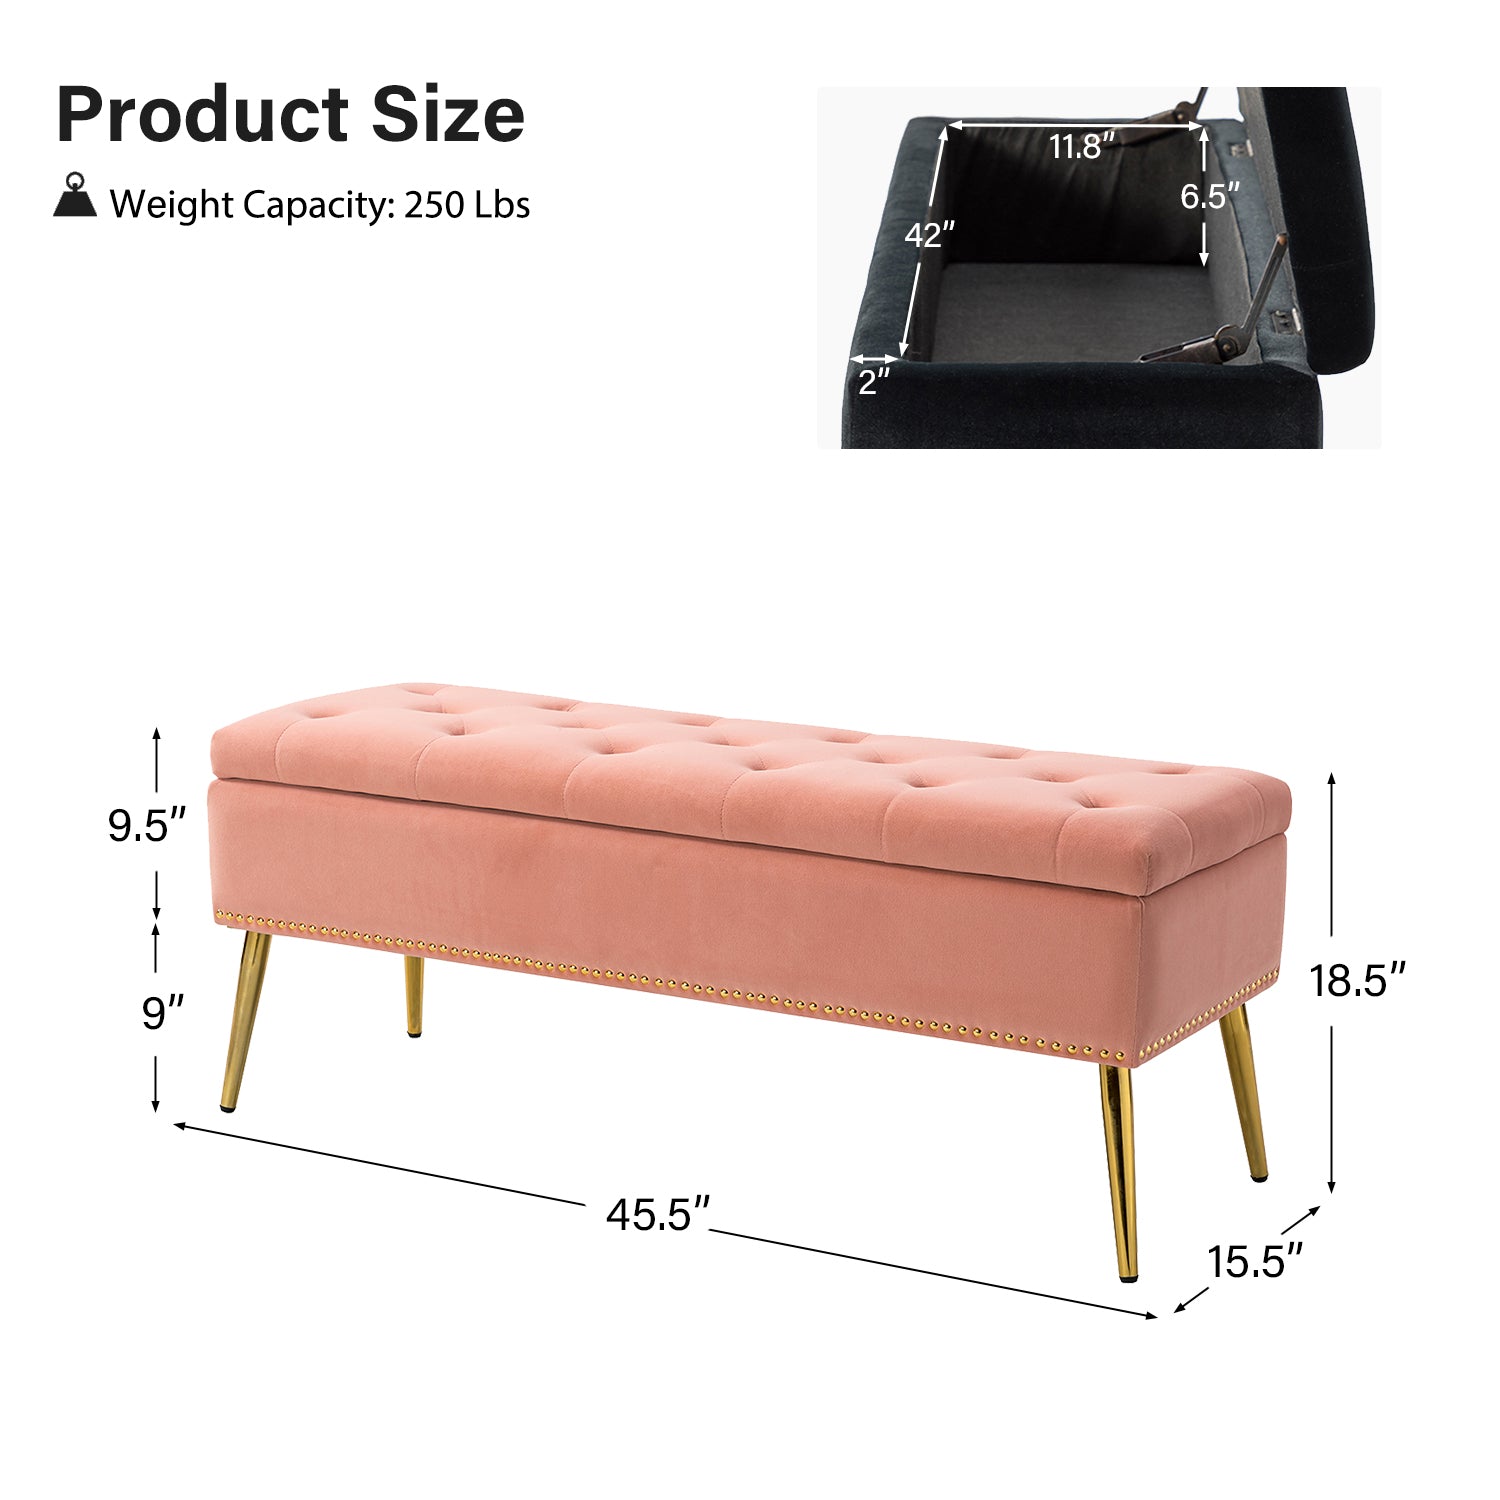 Lenore Upholstered Storage Bench